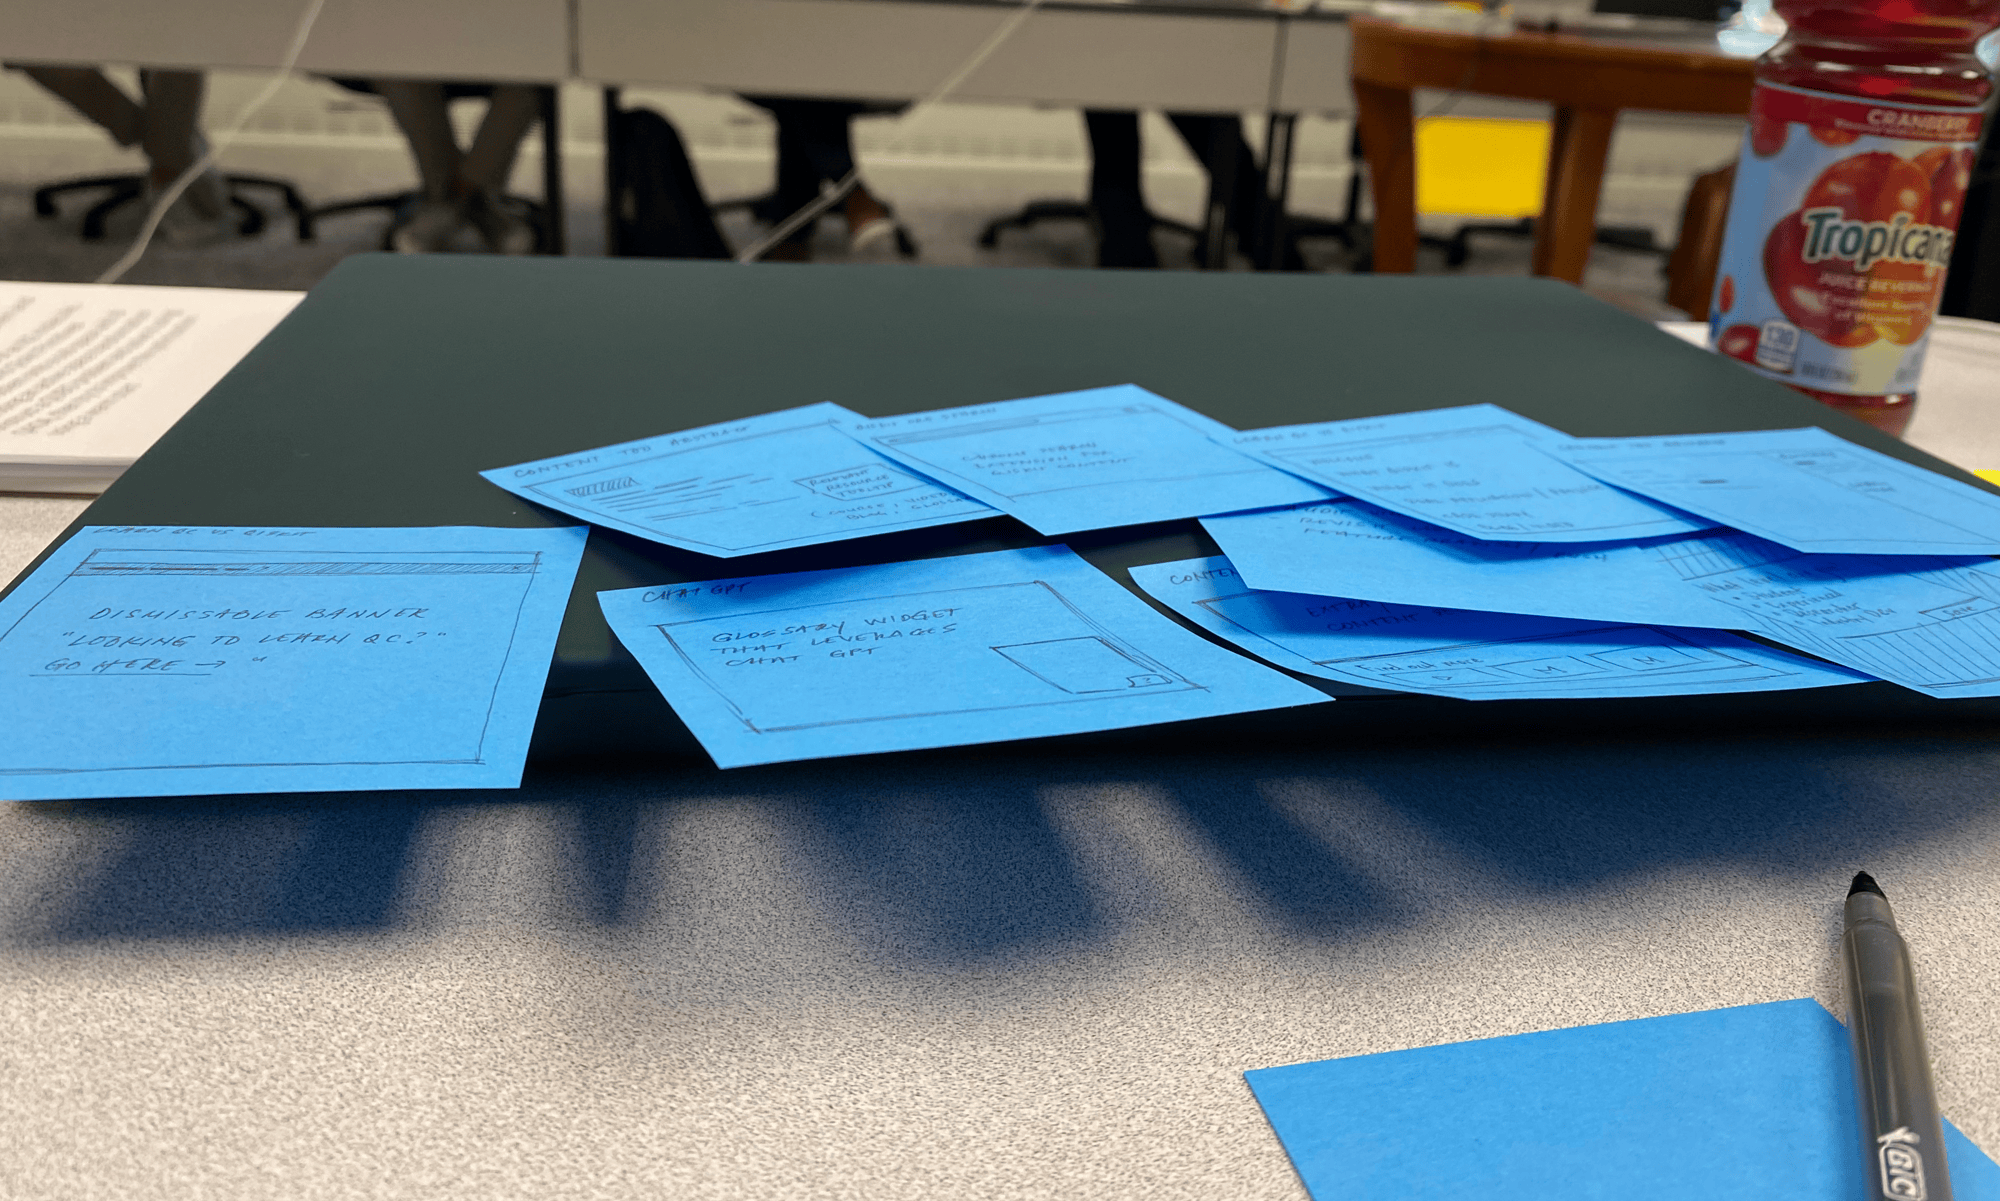 Several blue sticky notes with ideas and sketches, posted on my laptop